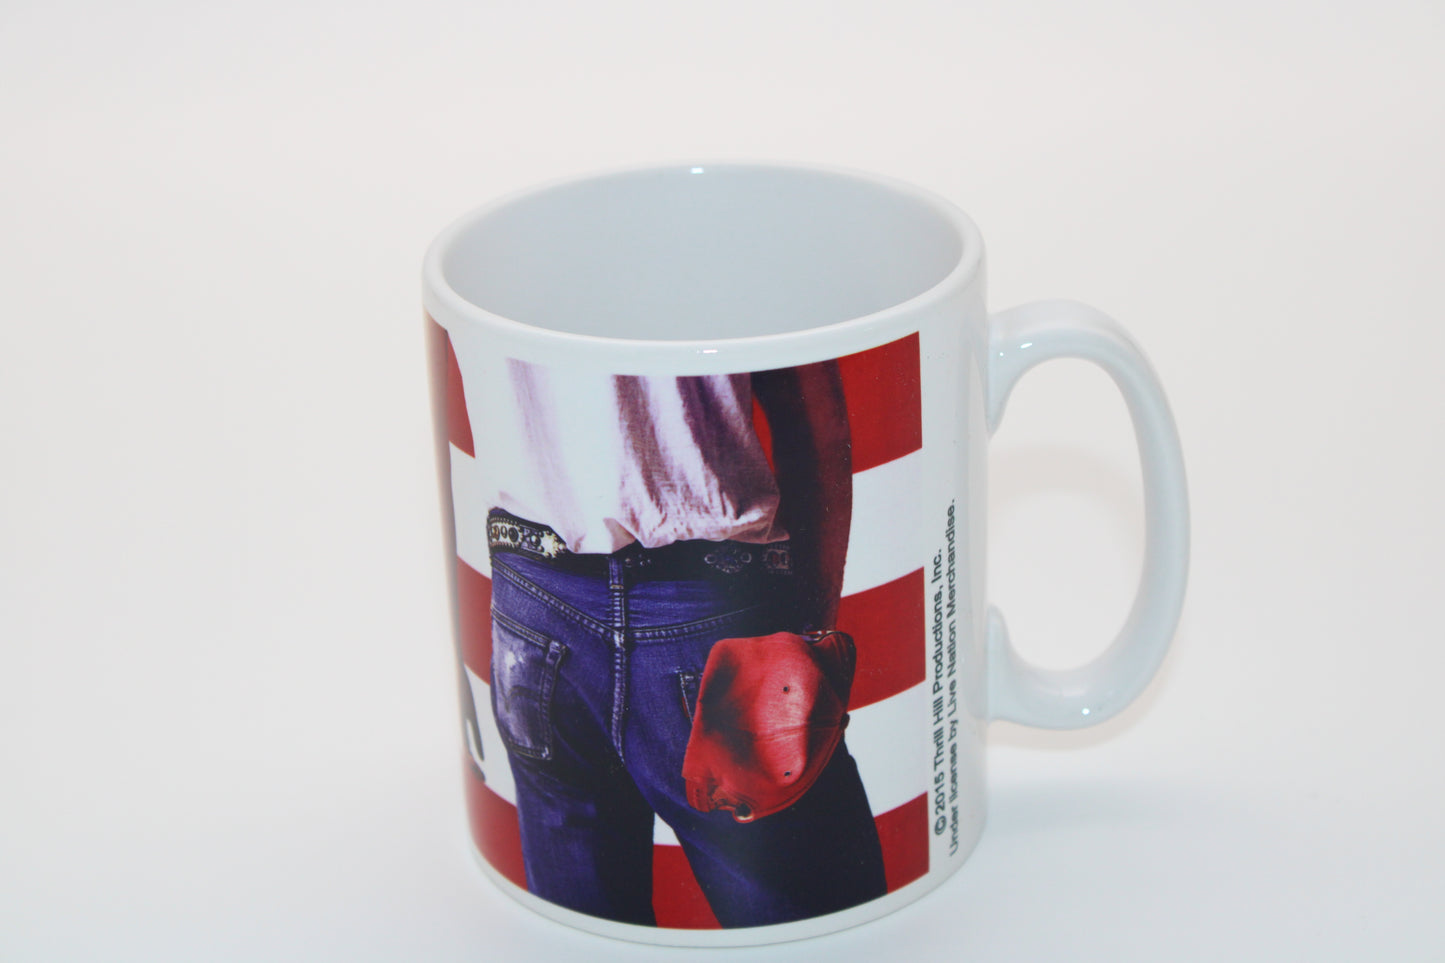 Bruce Springsteen Born in the USA Coffee Mug - Authentic Thrill Hill 2015